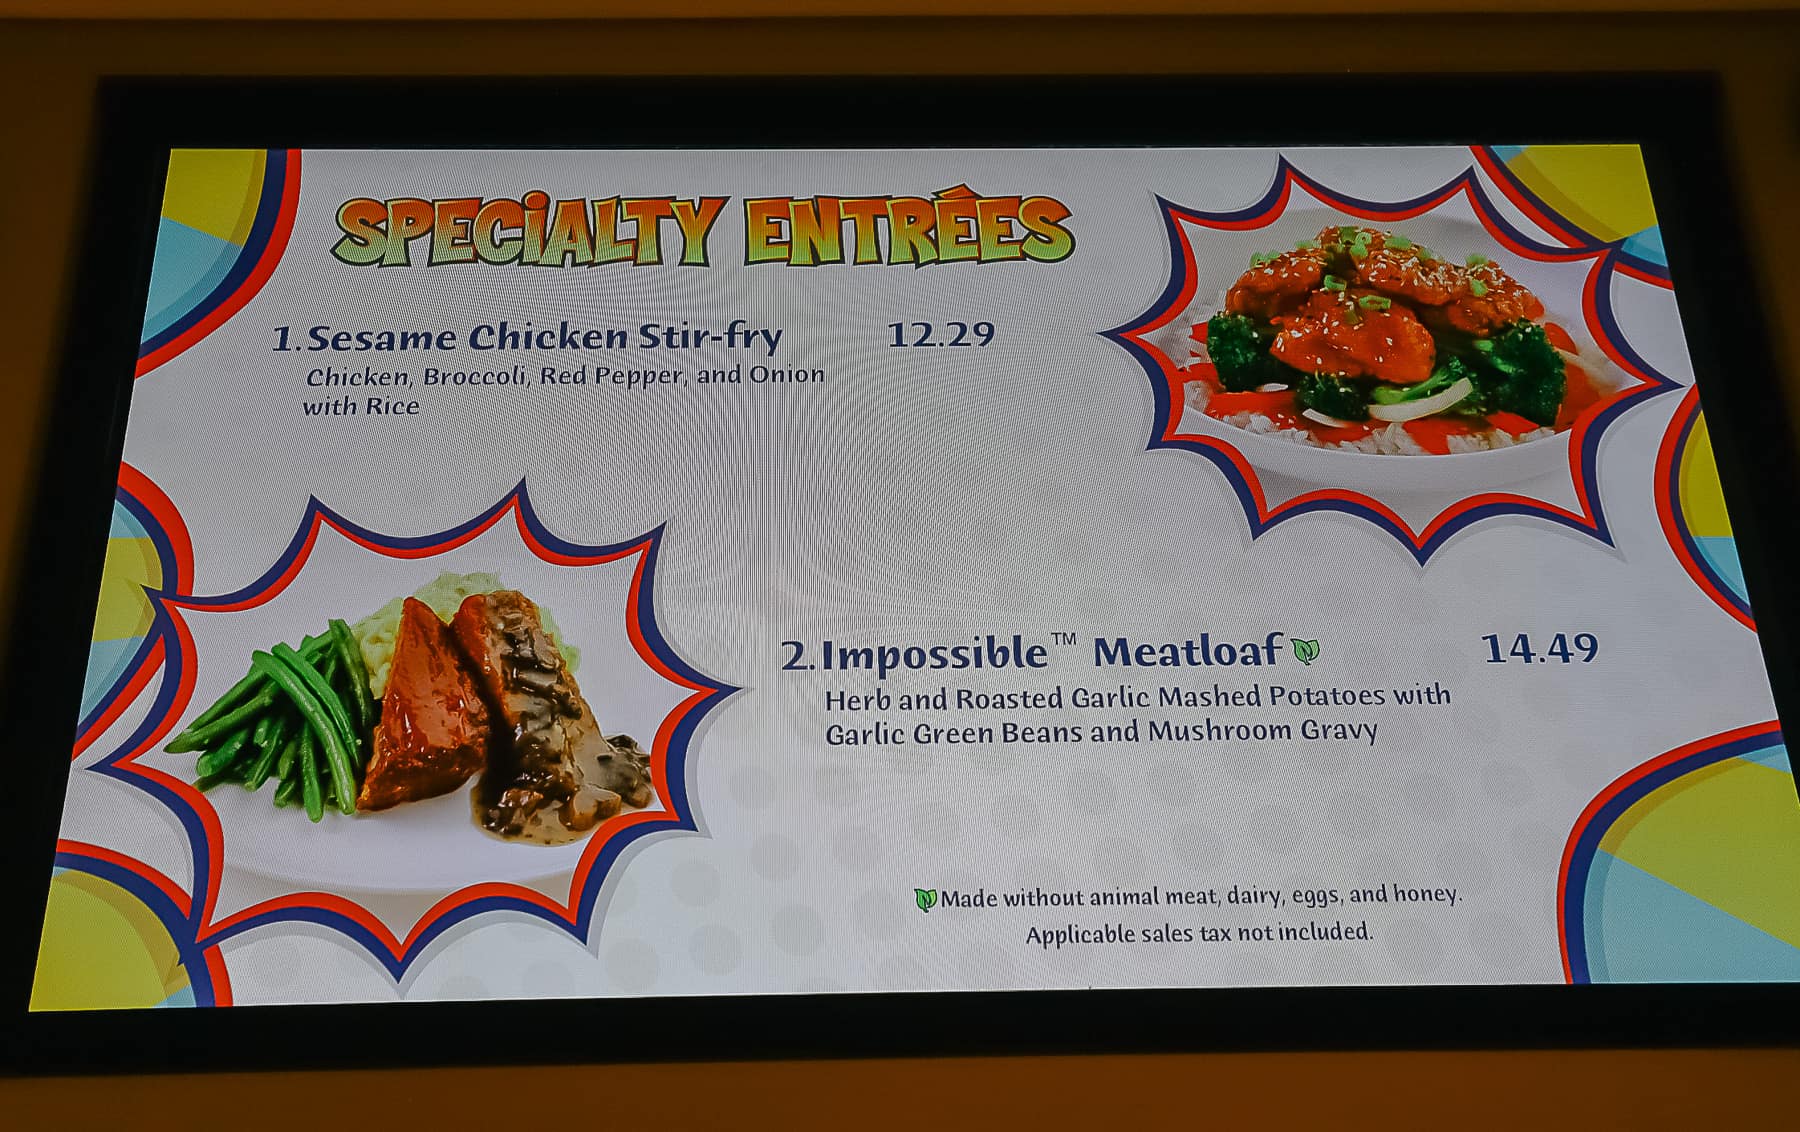 a menu with specialty entrees